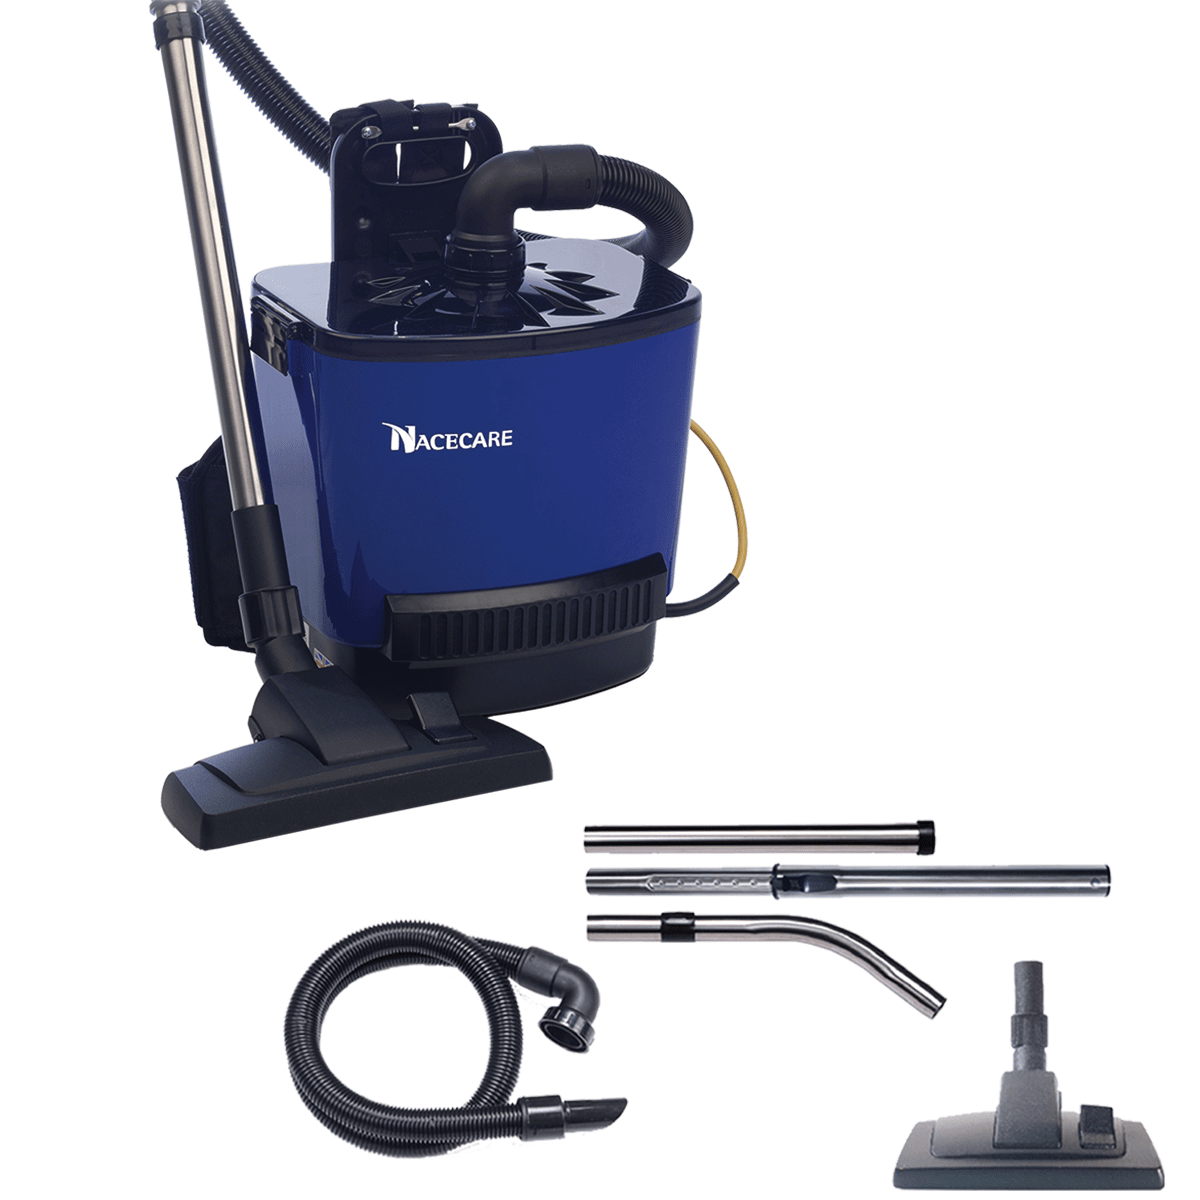 Nacecare Rsv 130 Backpack Vacuum With Performance Kit - Astb1